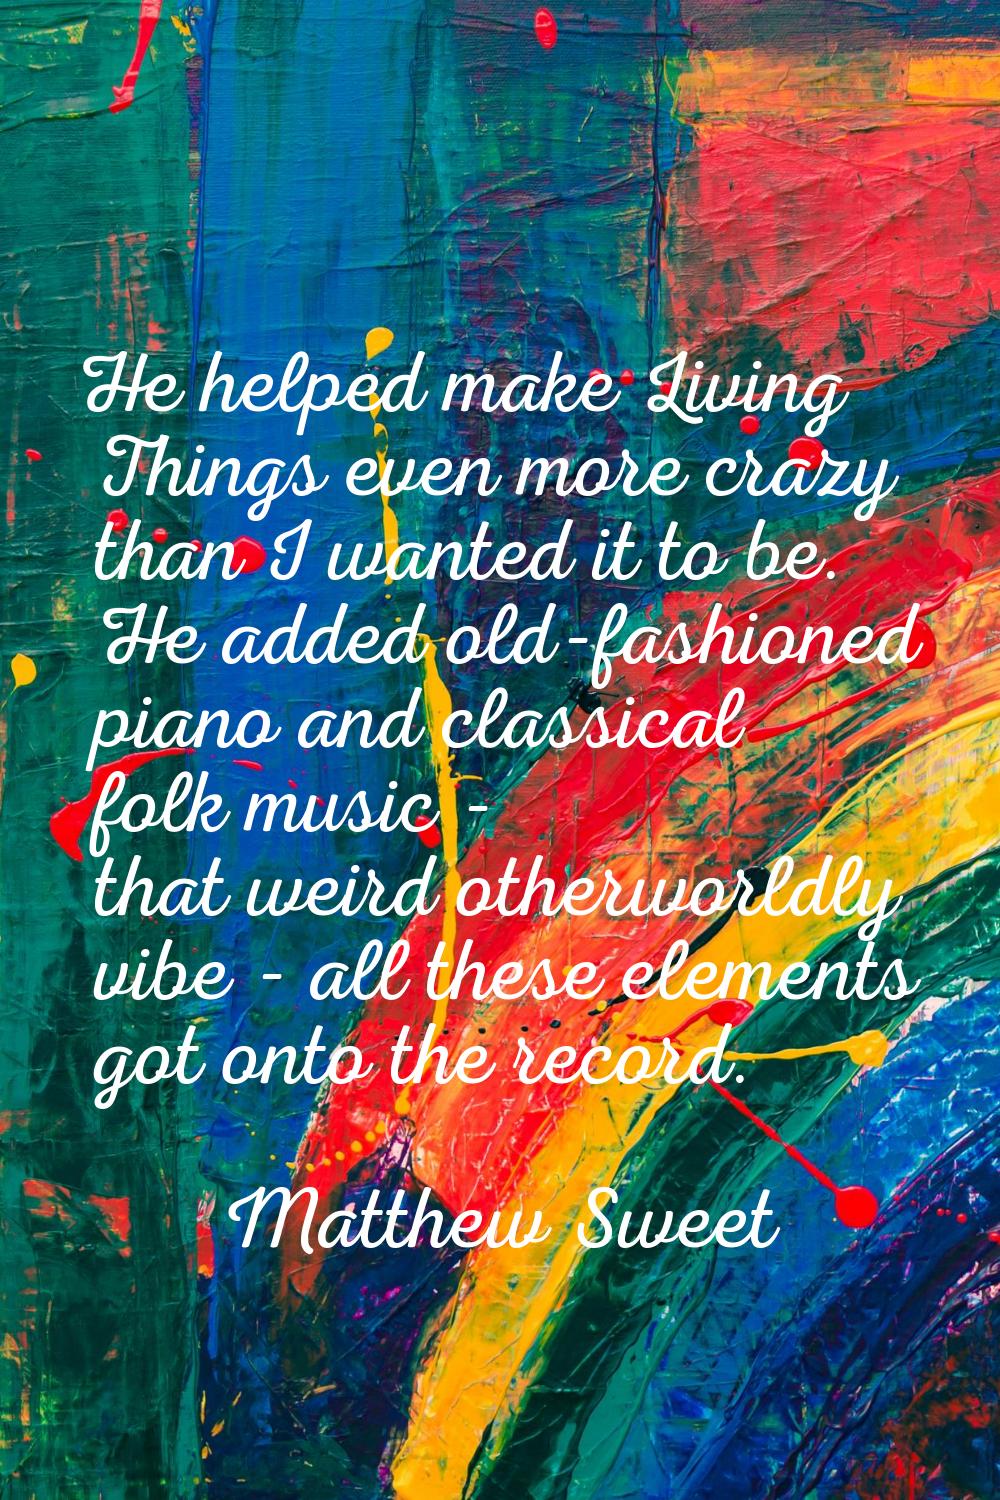 He helped make Living Things even more crazy than I wanted it to be. He added old-fashioned piano a